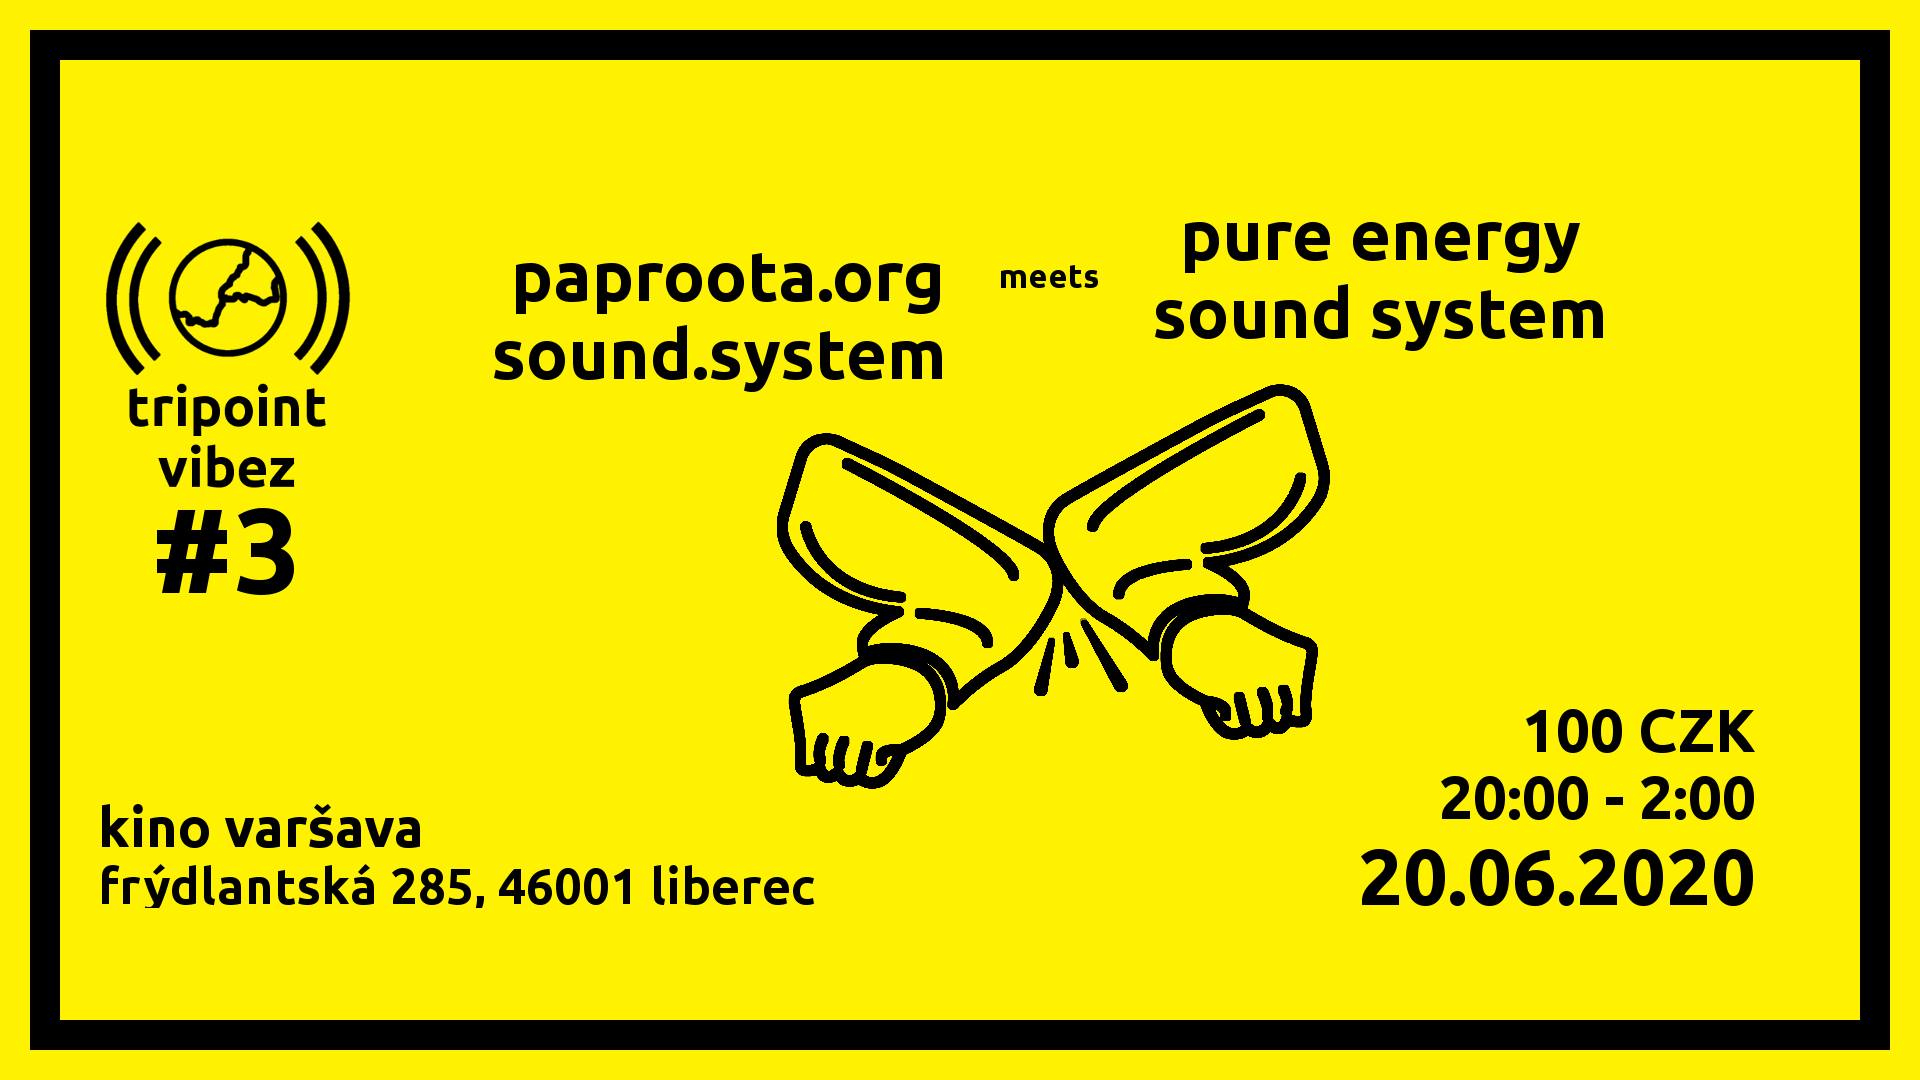 Tripoint Vibez #3 - Paproota.org meets Pure Energy Sound System